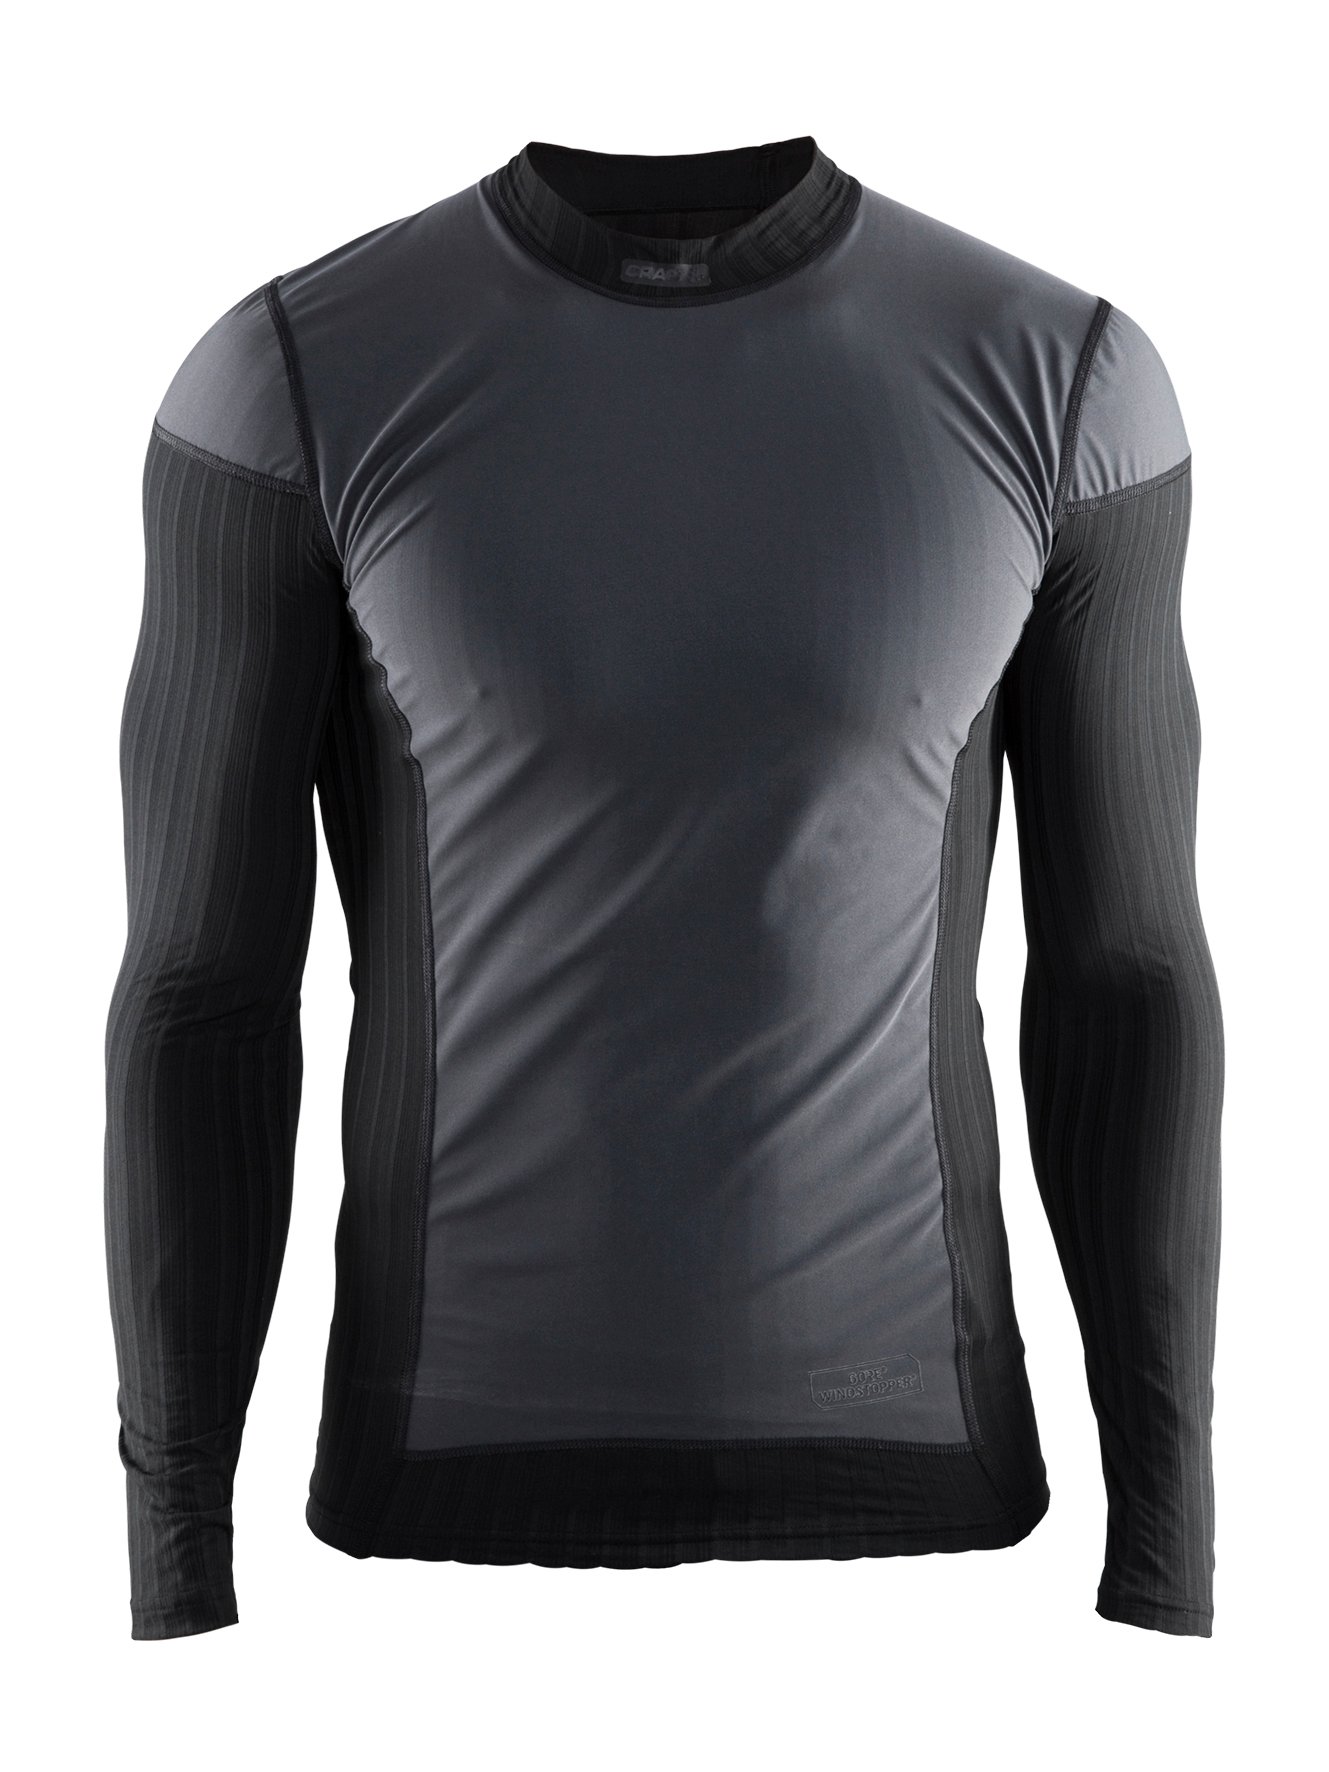 Craft Mens Active Extreme 2.0 CN T Shirt Tee Top Black Sports Running Breathable 